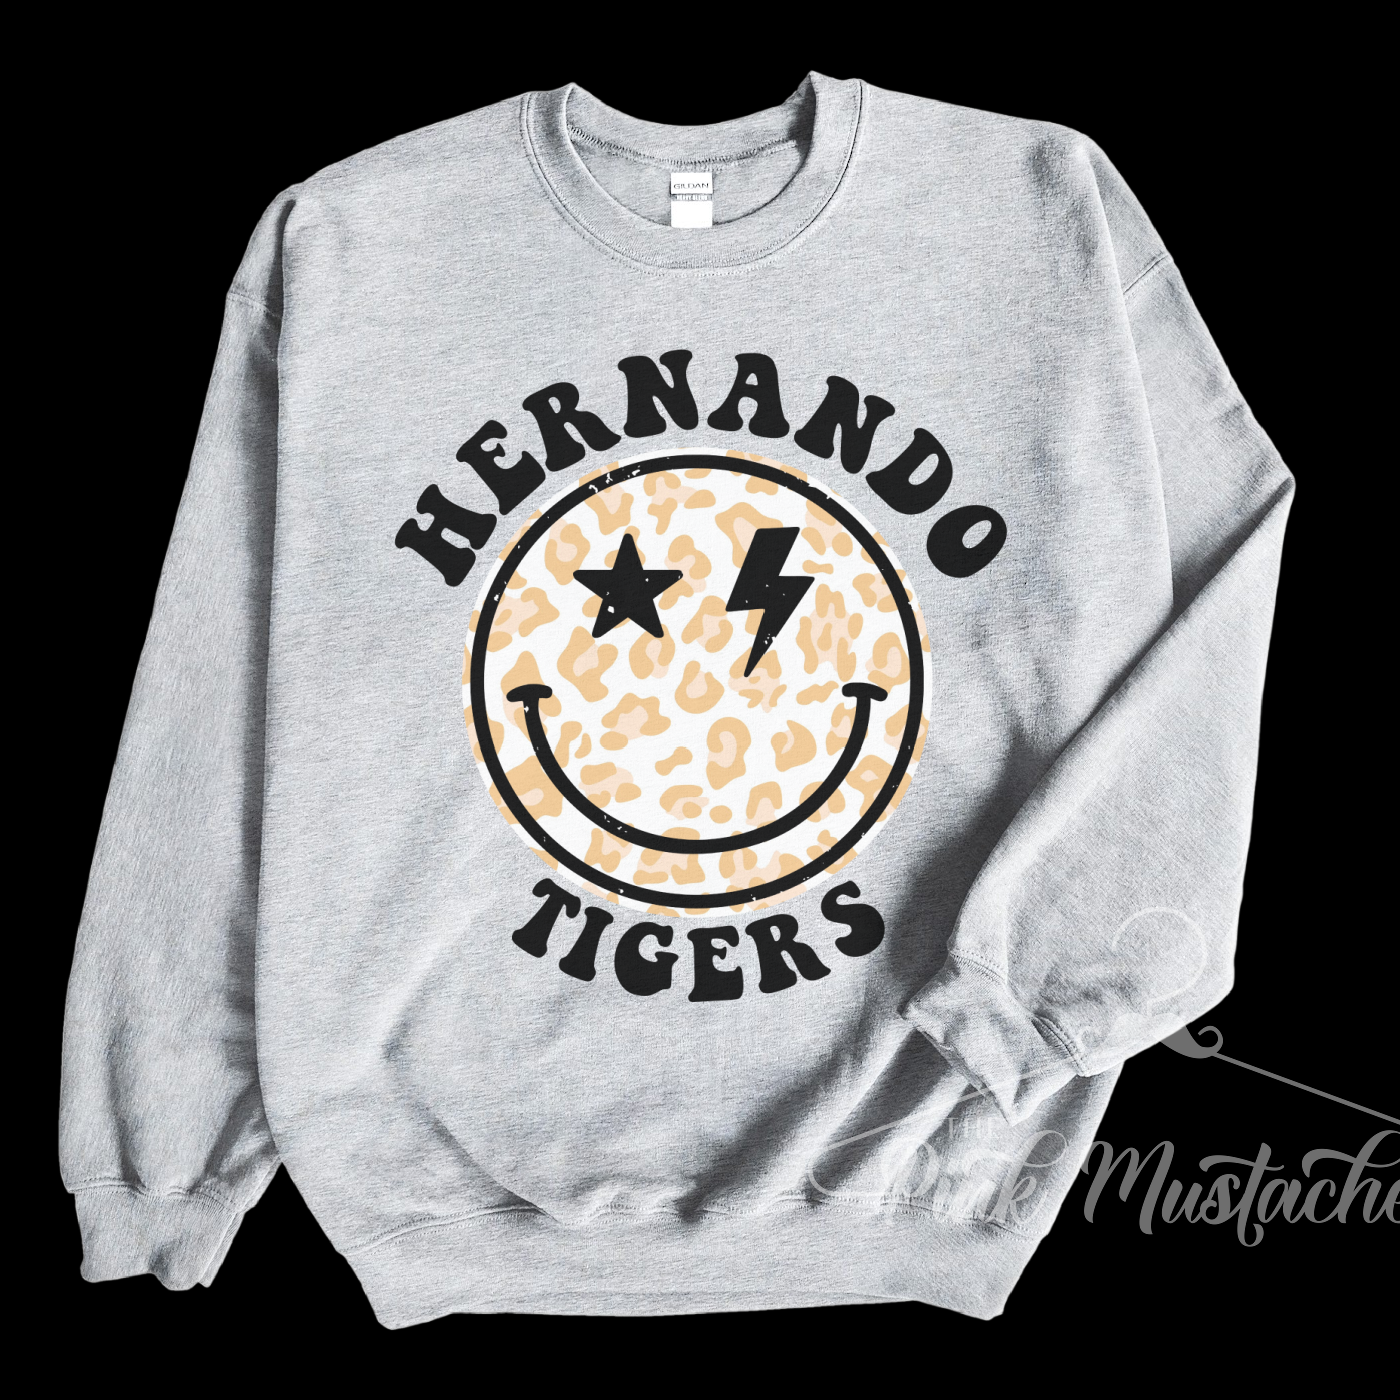 Hernando Tigers Distressed Smiley Unisex Sweatshirt / Toddler, Youth, and Adult Sizes/ Desoto County Schools / Mississippi School Shirt